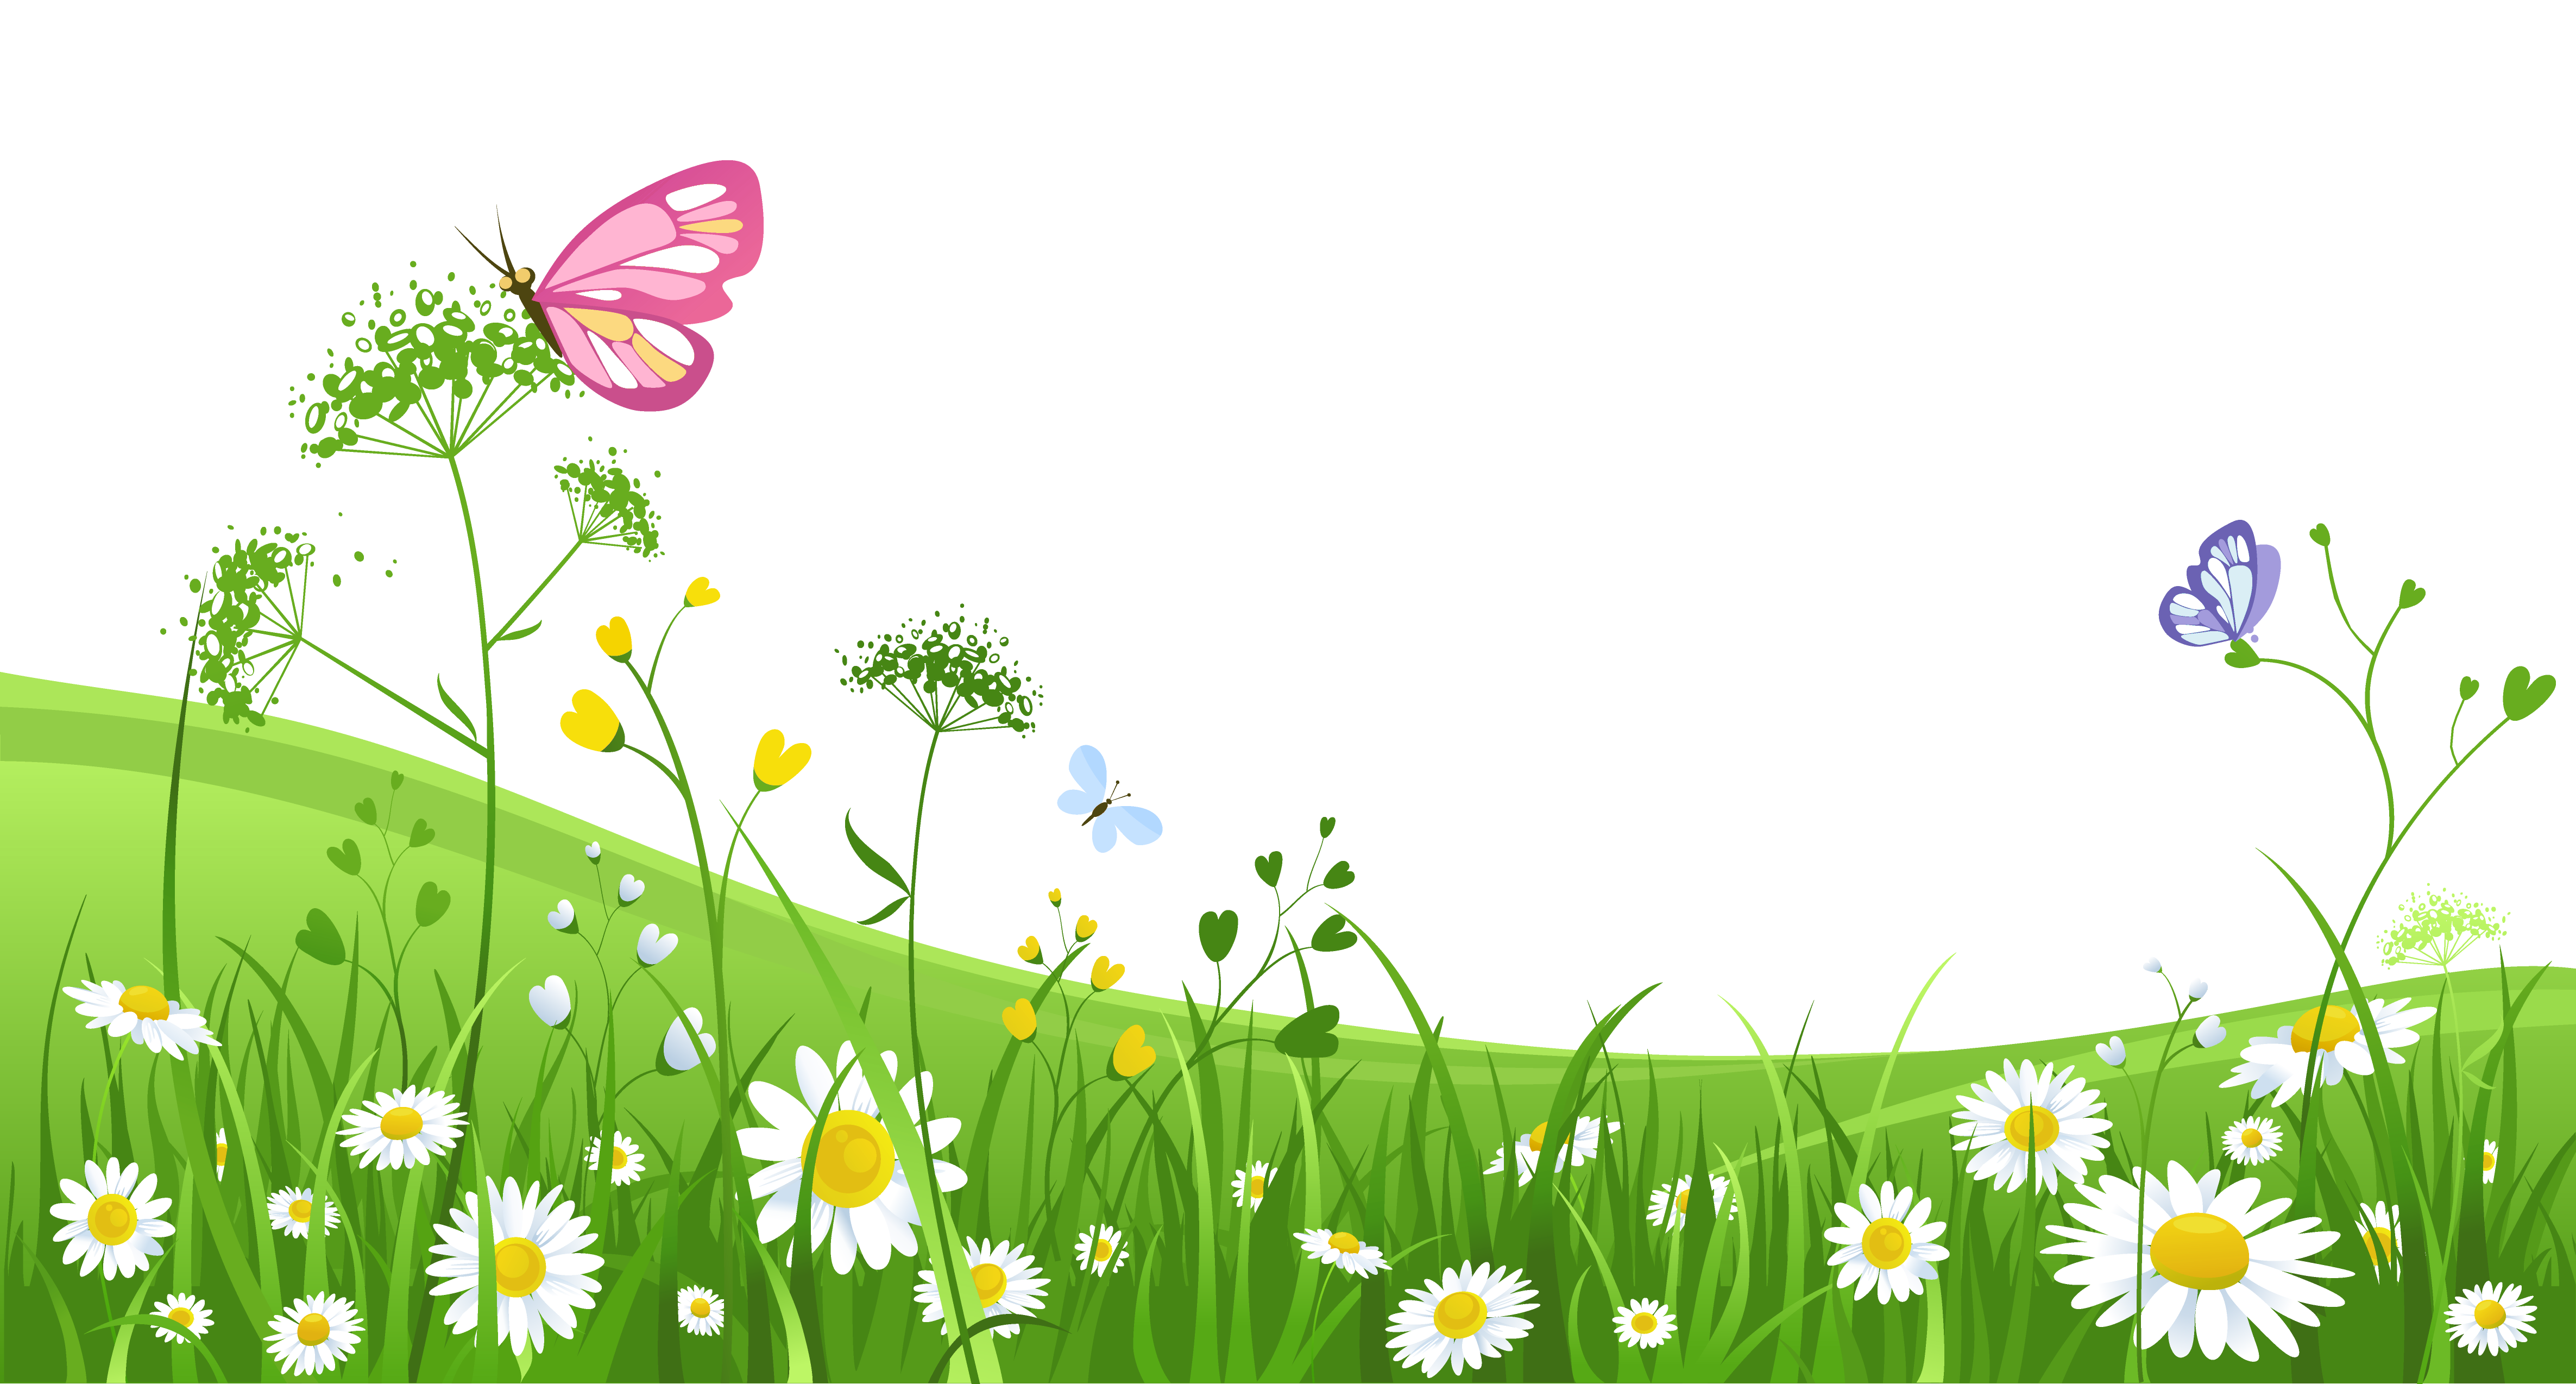 Environment clipart natural. Grass with butterflies picture